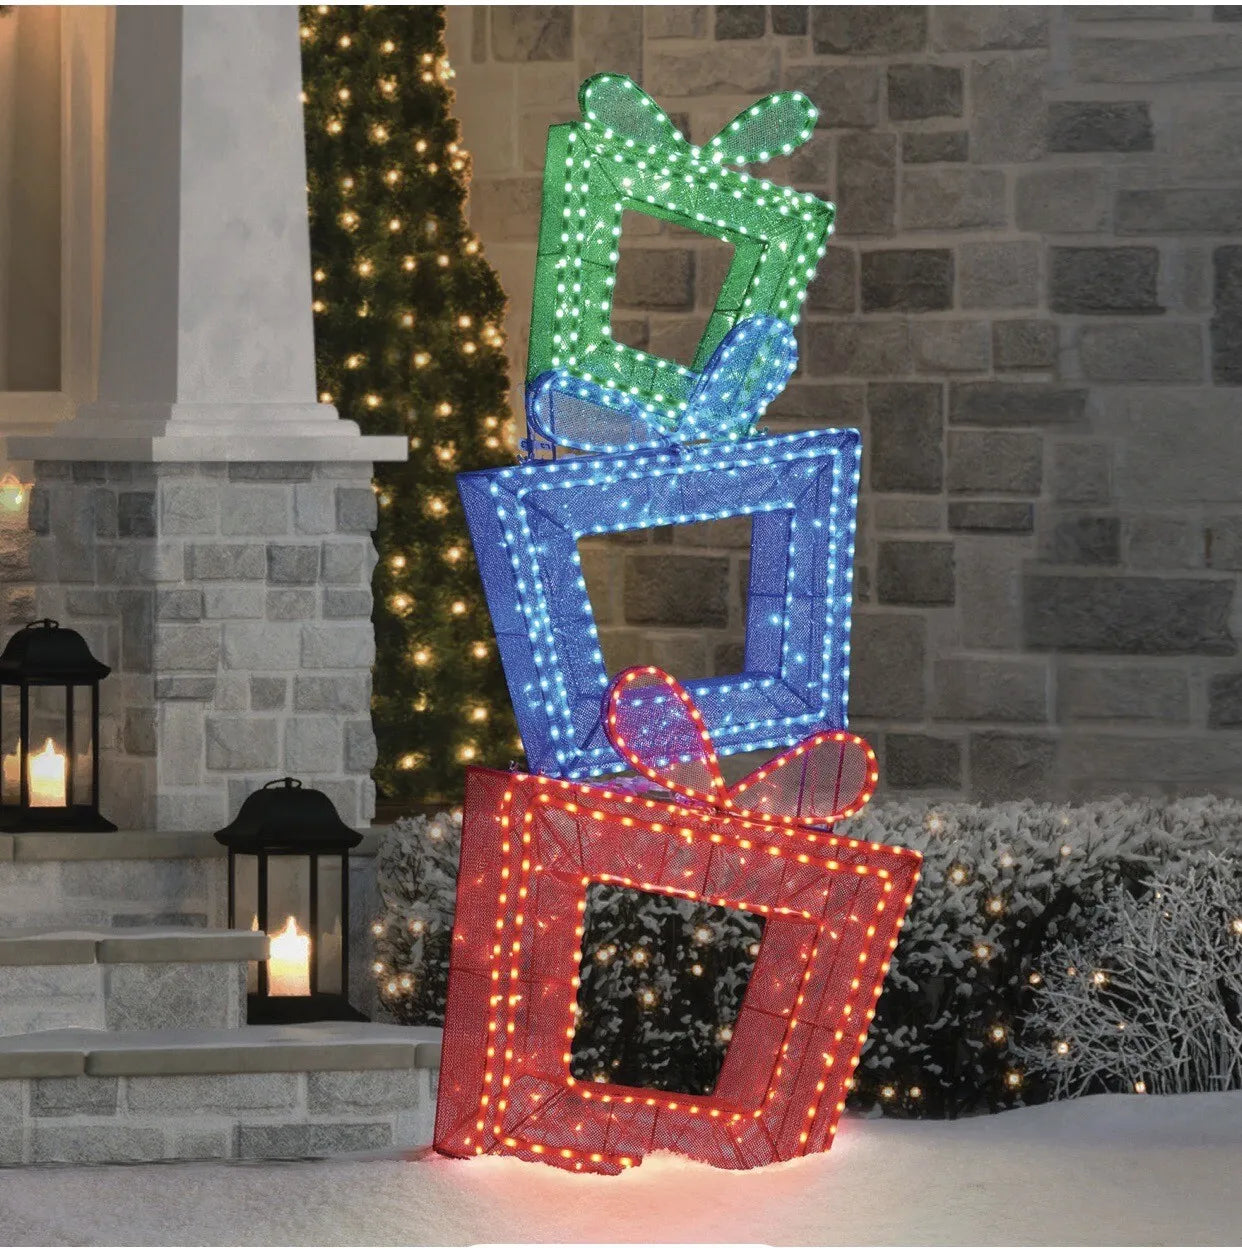 Member's Mark 5' Pre-Lit Twinkling Present Tower - Multicolor, Christmas Deor